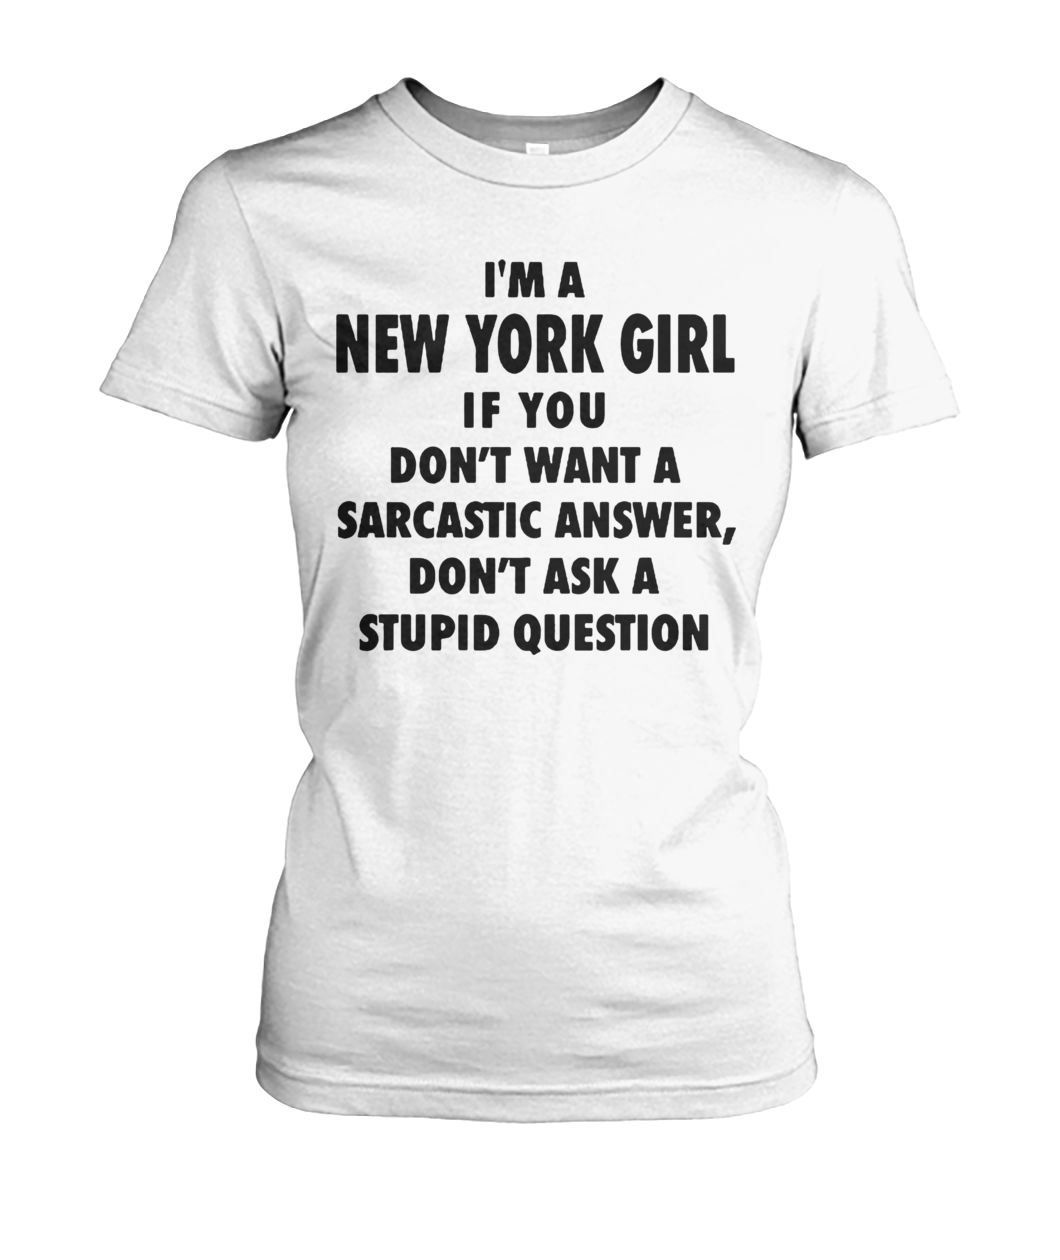 I'm an new york girl if you don't want a sarcastic answer don't ask a stupid question women's crew tee